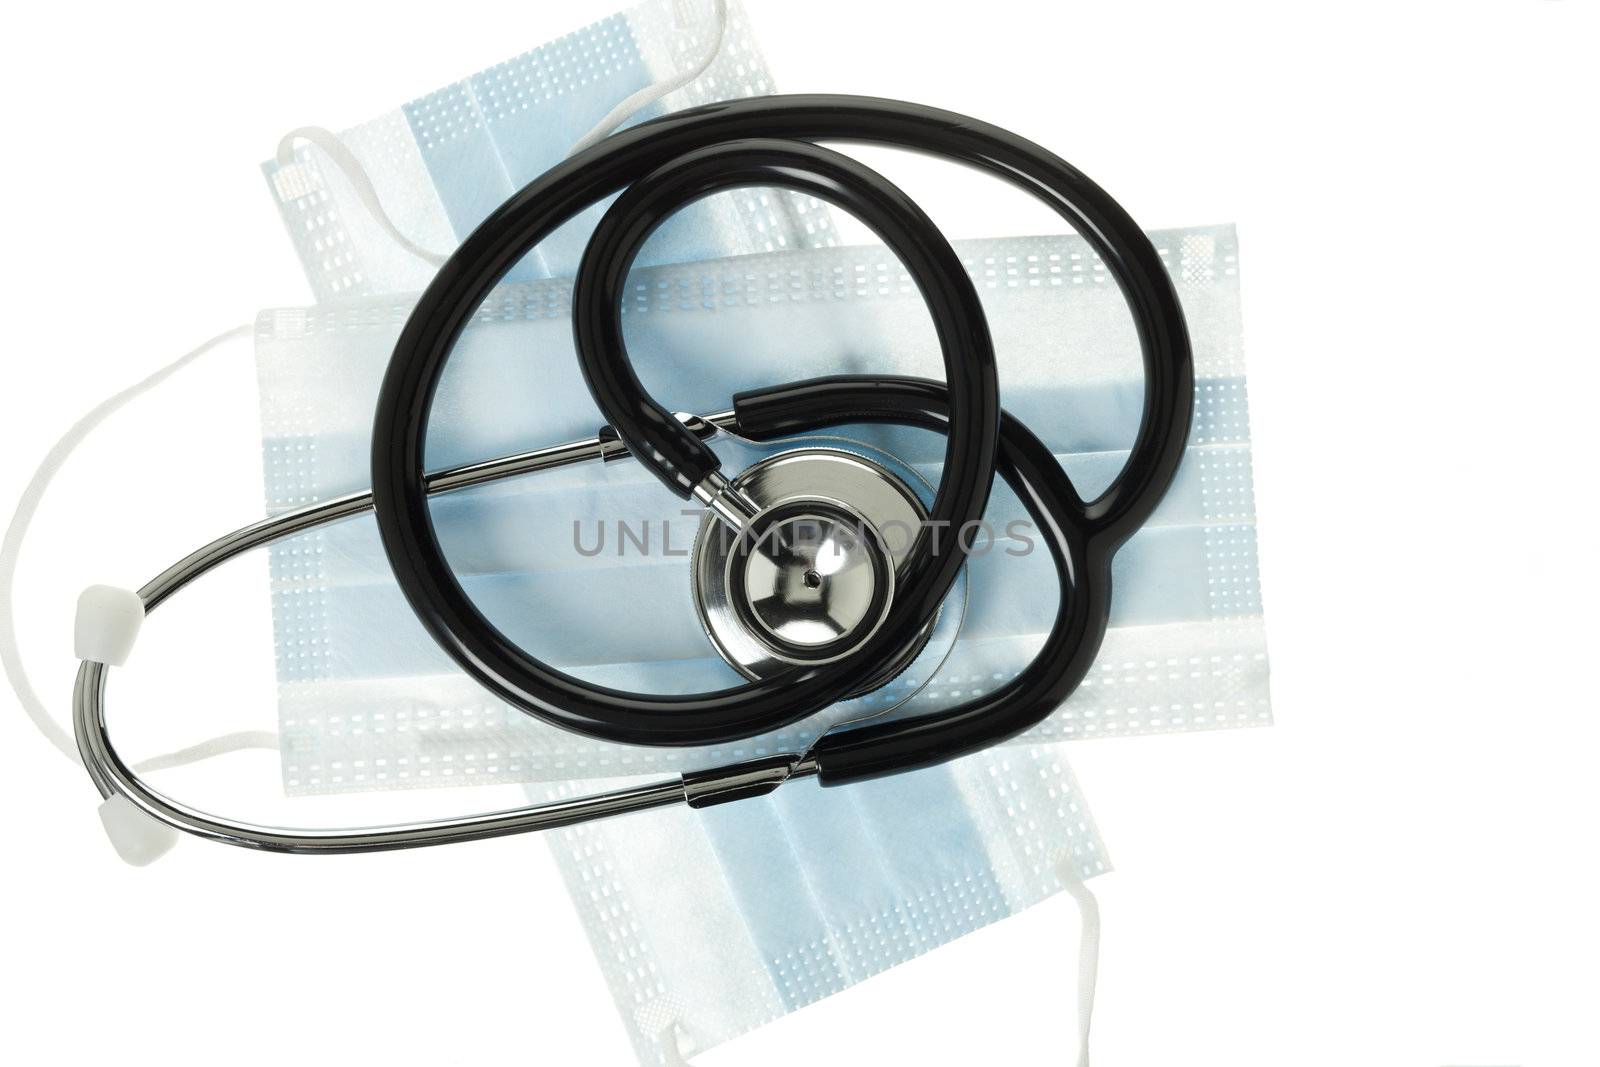 stethoscope and surgical mask by kozzi